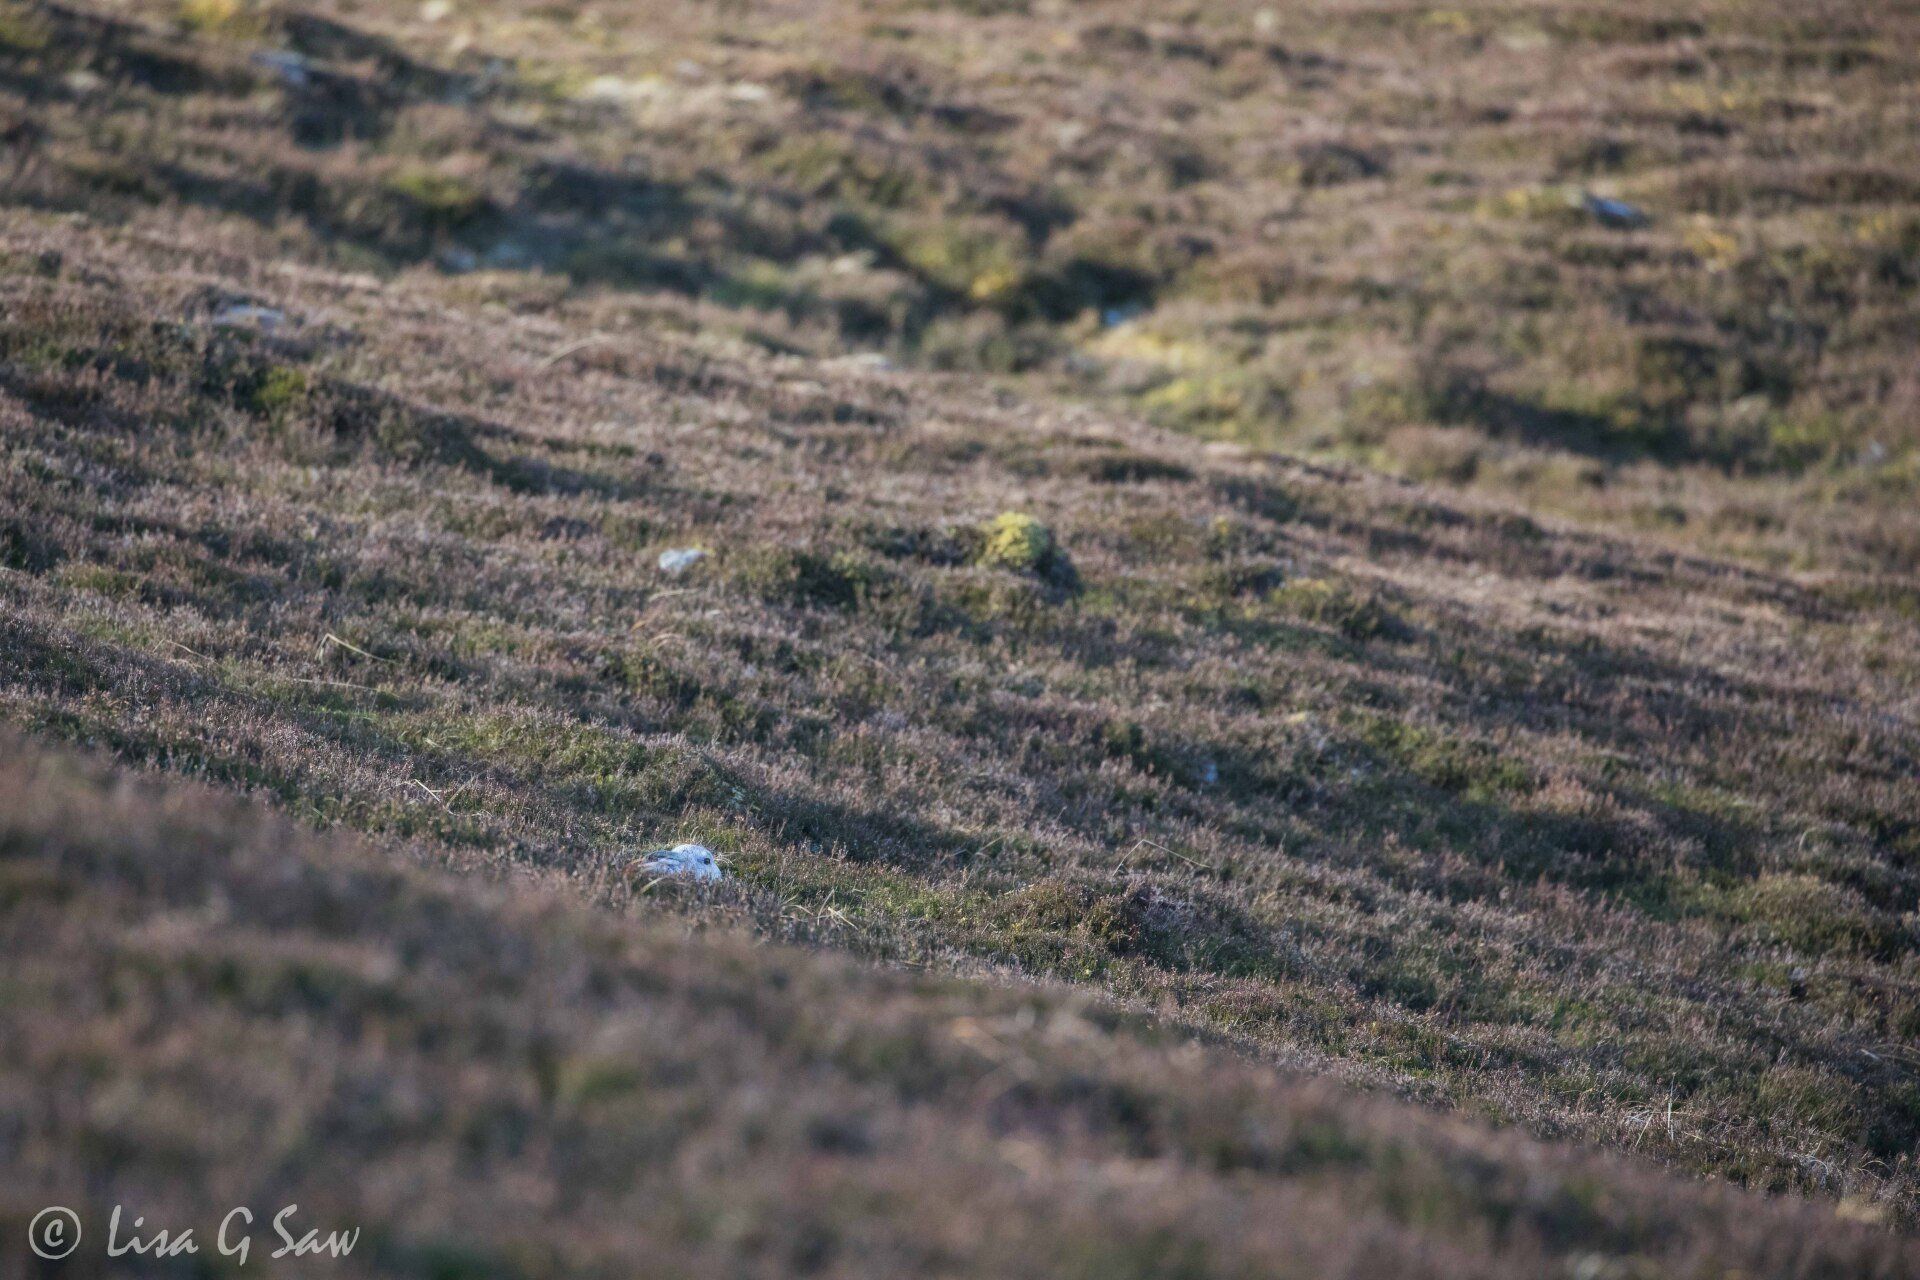 White Mountain Hare in winter pelage in heather